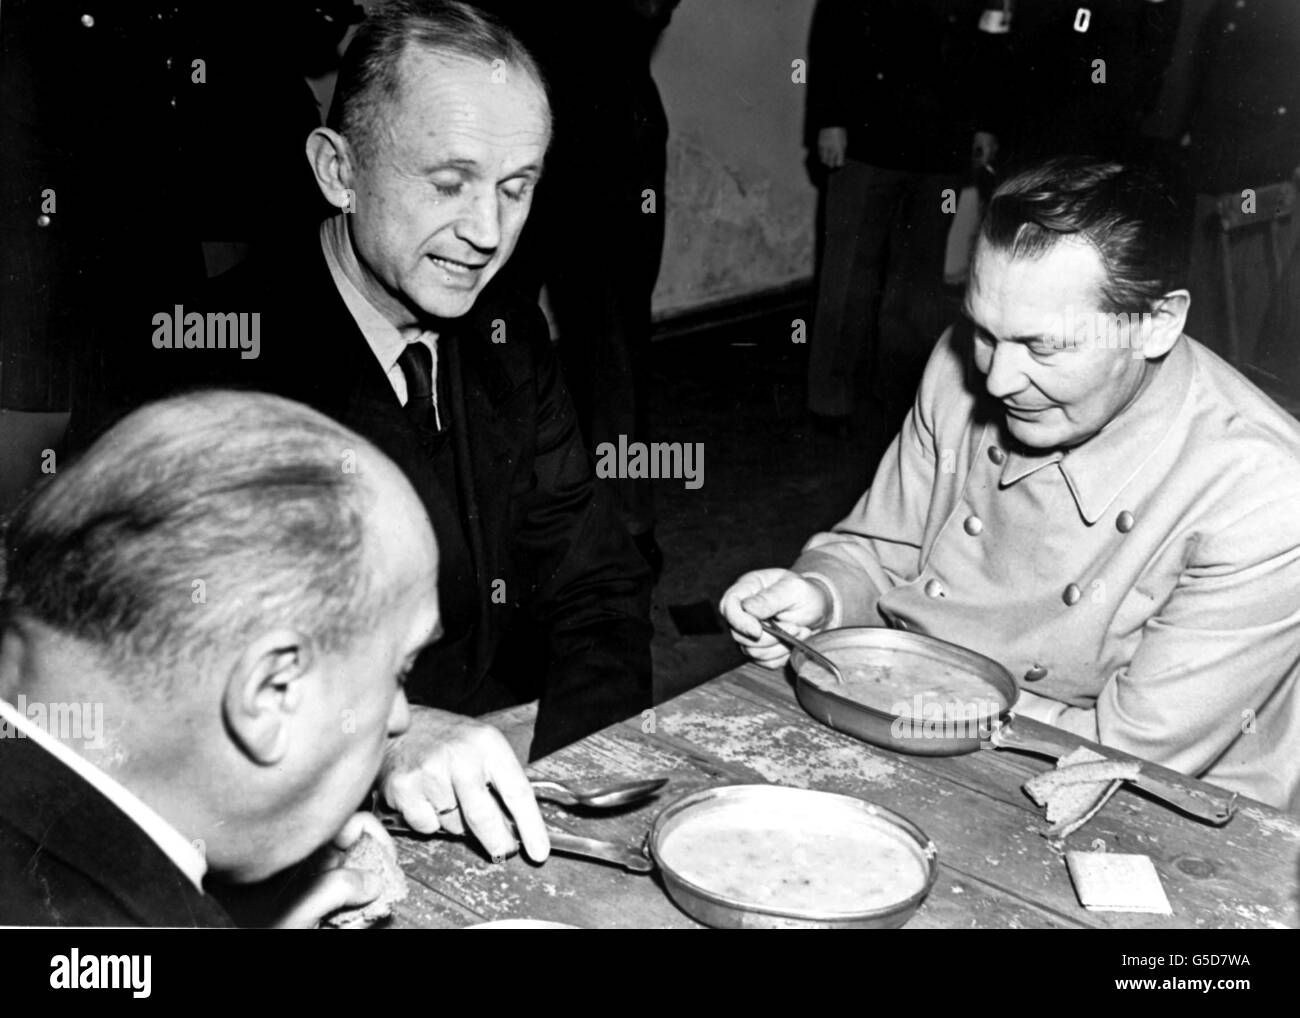 Admiral Karl Doenitz (c), Fuhrer of the German Reich after Hitler's suicide, eats with former Reichsmarschall Hermann Goering (r), under guard during the post-war Nuremberg Trials. The trials at the Palace of Justice began on the 20th November 1945. Picture part of PA Second World War collection. Stock Photo